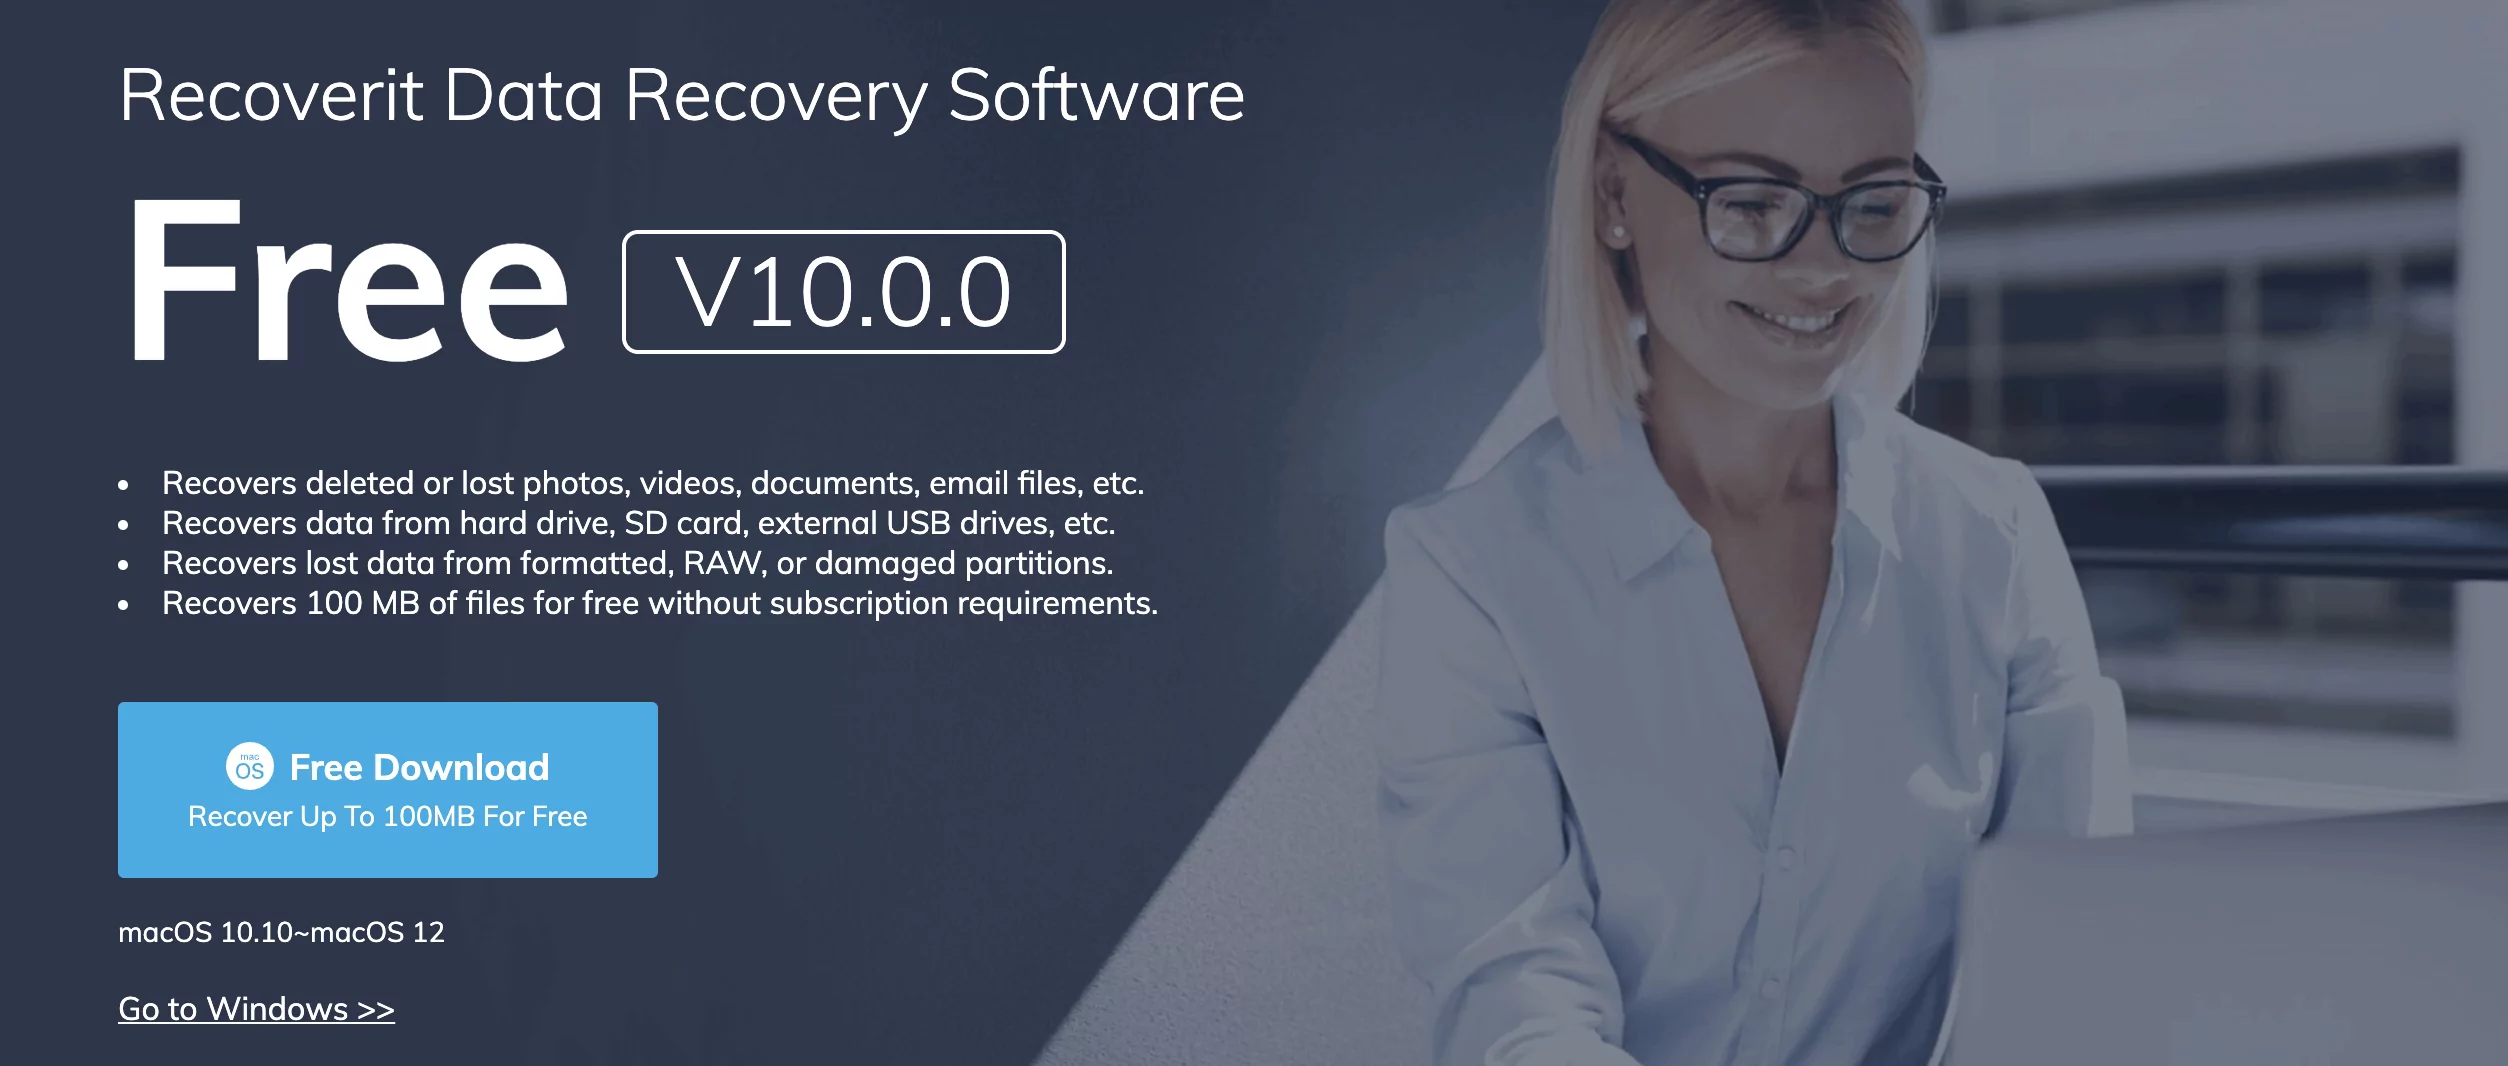 recoverit-data-recovery-software-for-mac